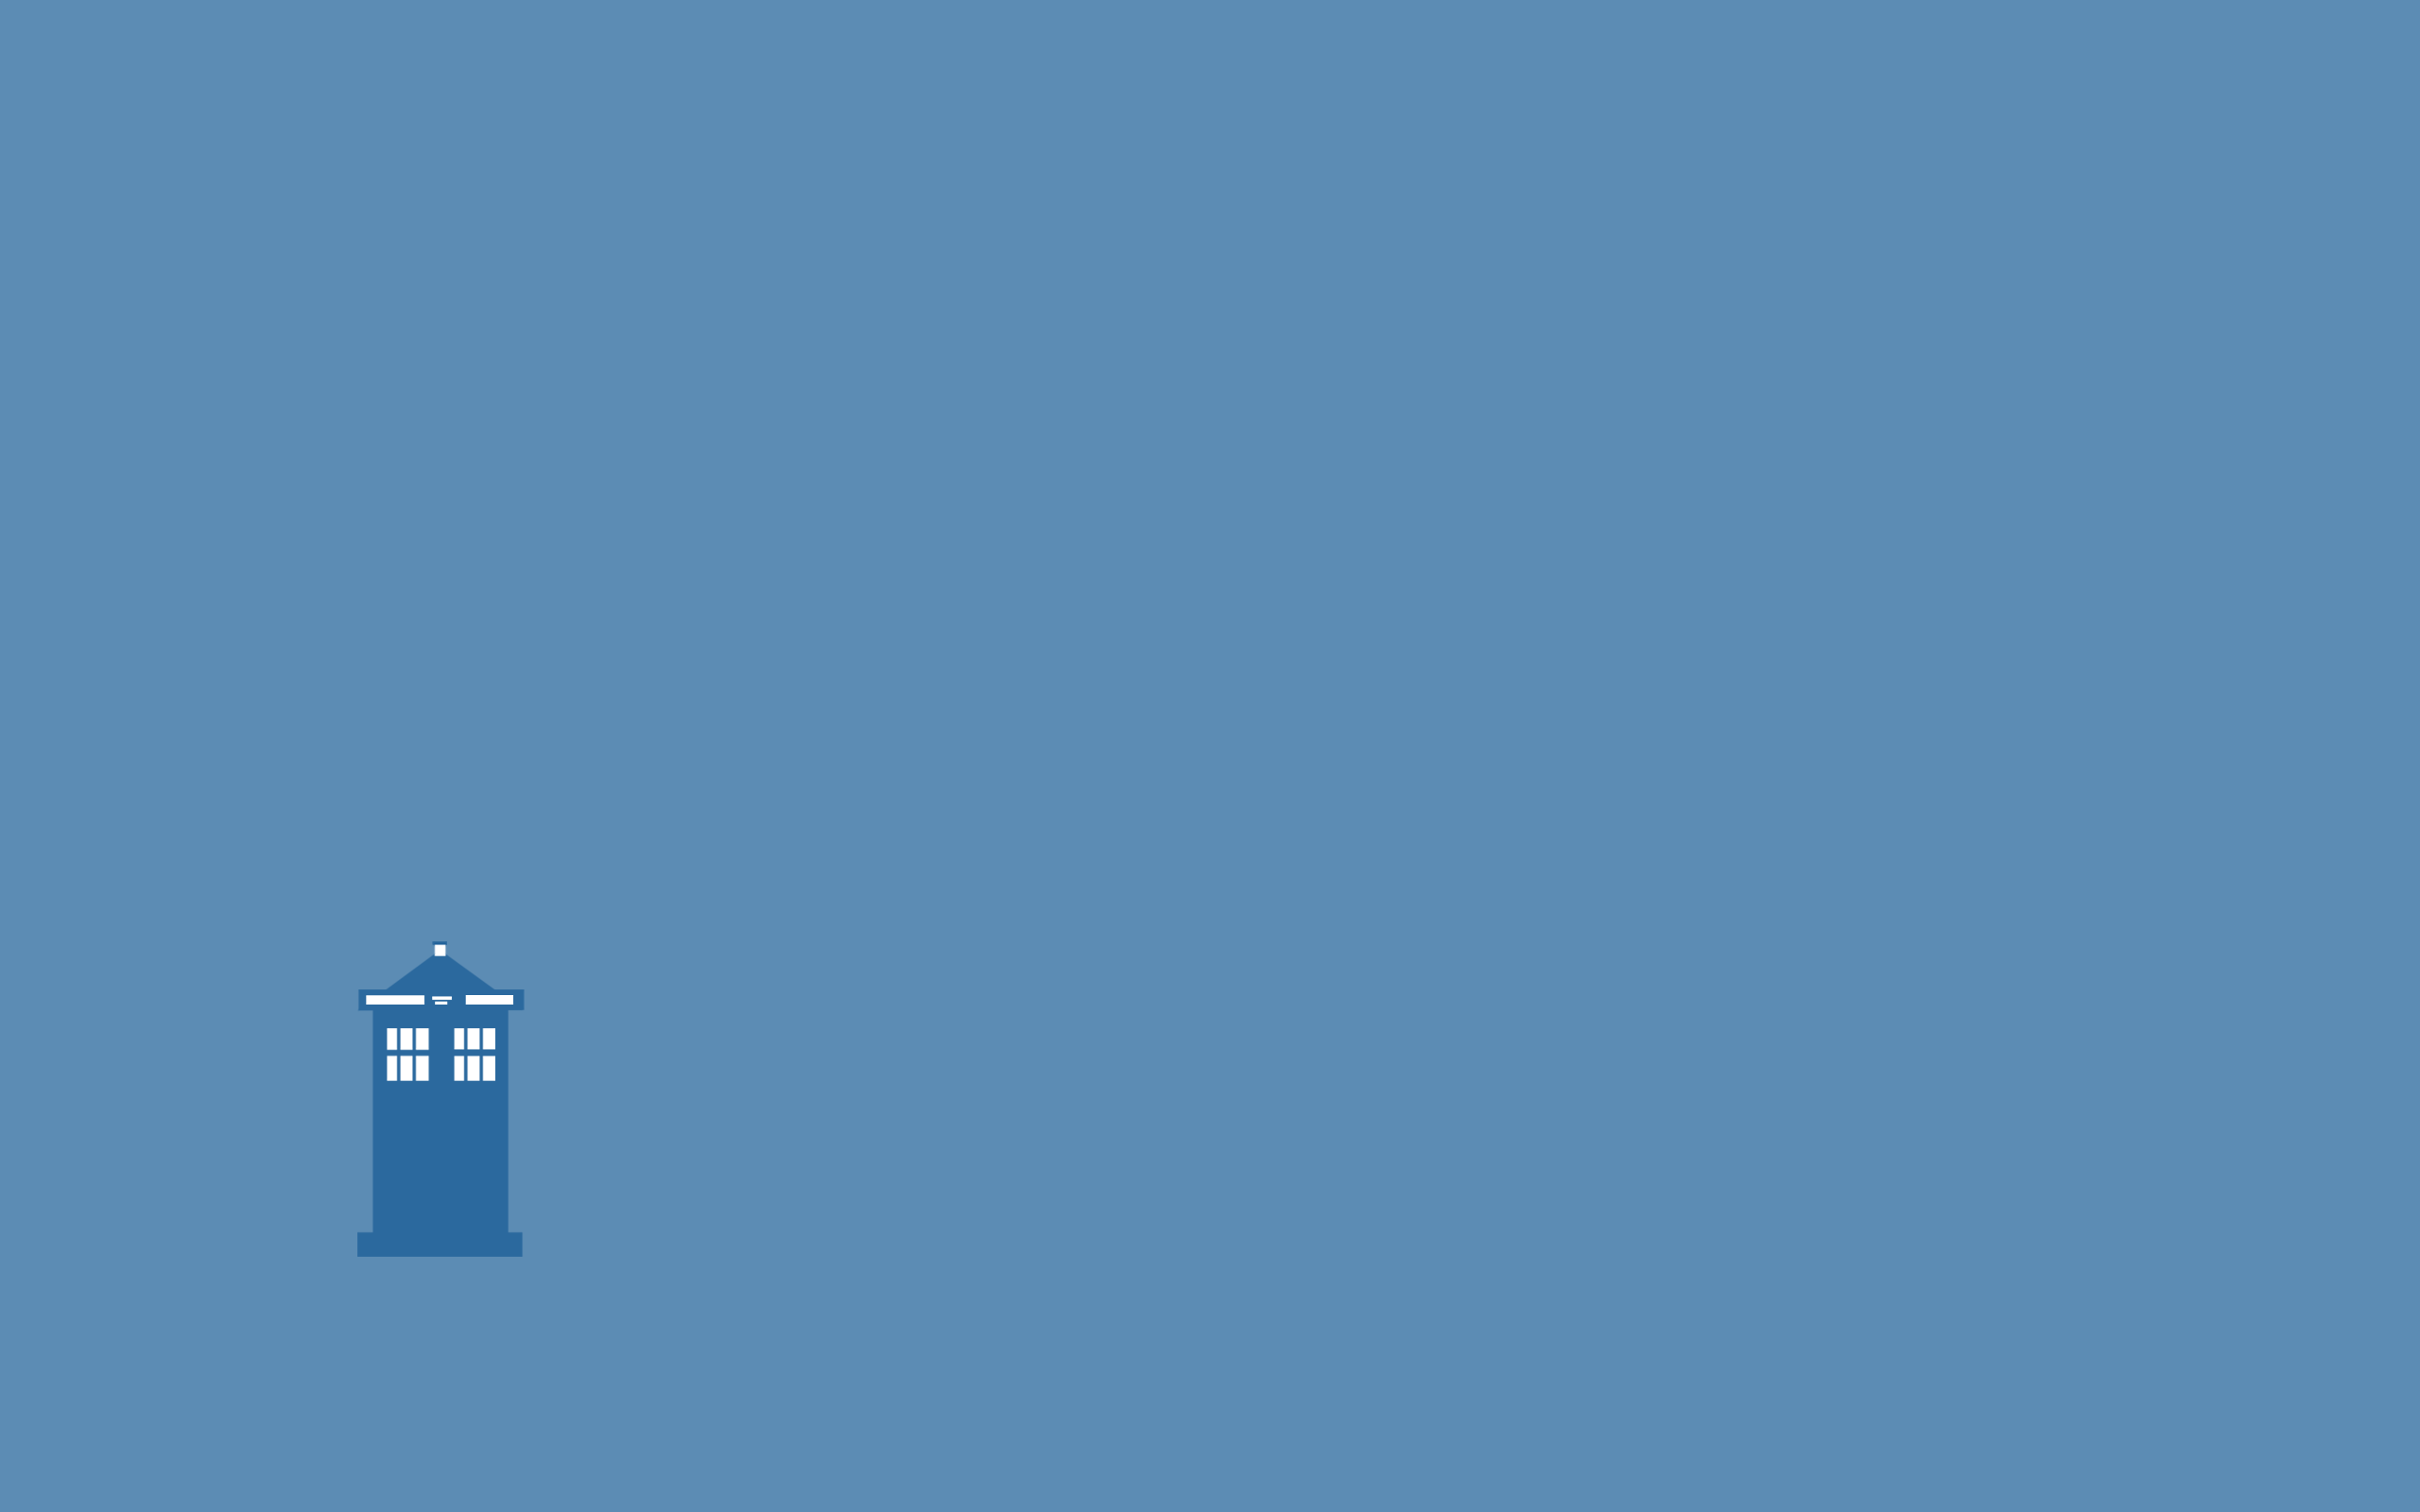 Cool Simple And Minimalist Desktop Wallpaper The Police Box Cooked